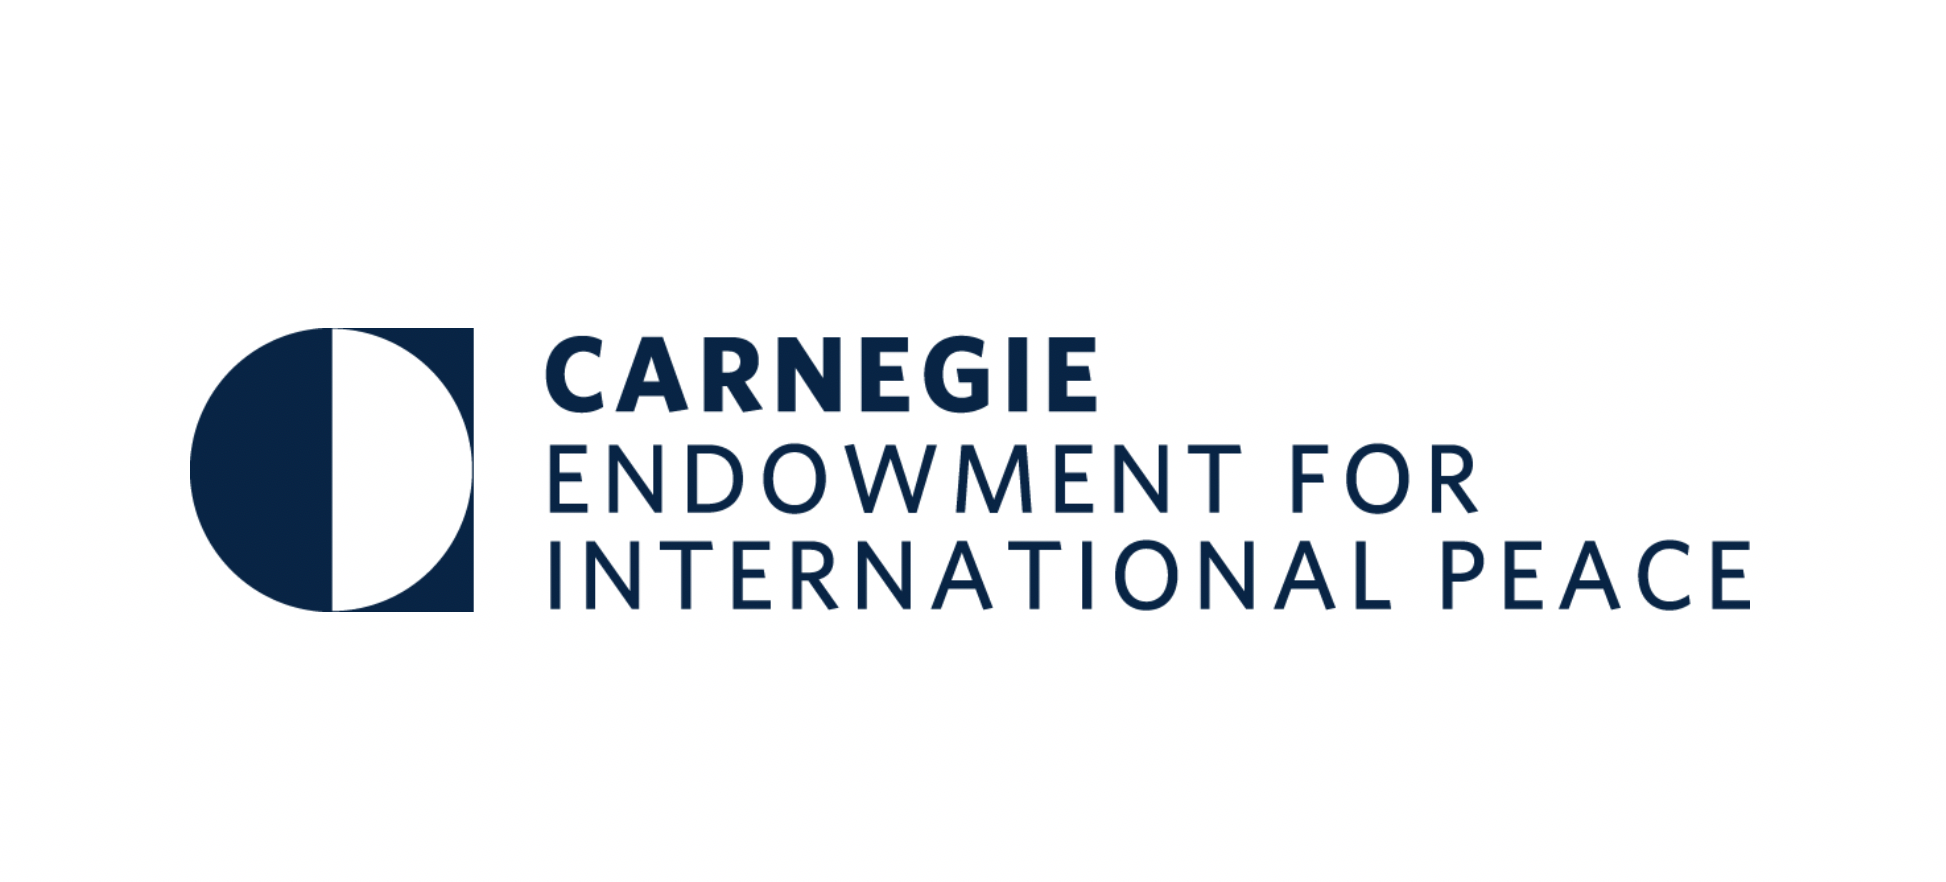 Carnegie Endowment for International Peace: The Working Group on Egypt’s Letter to Secretary of State Pompeo